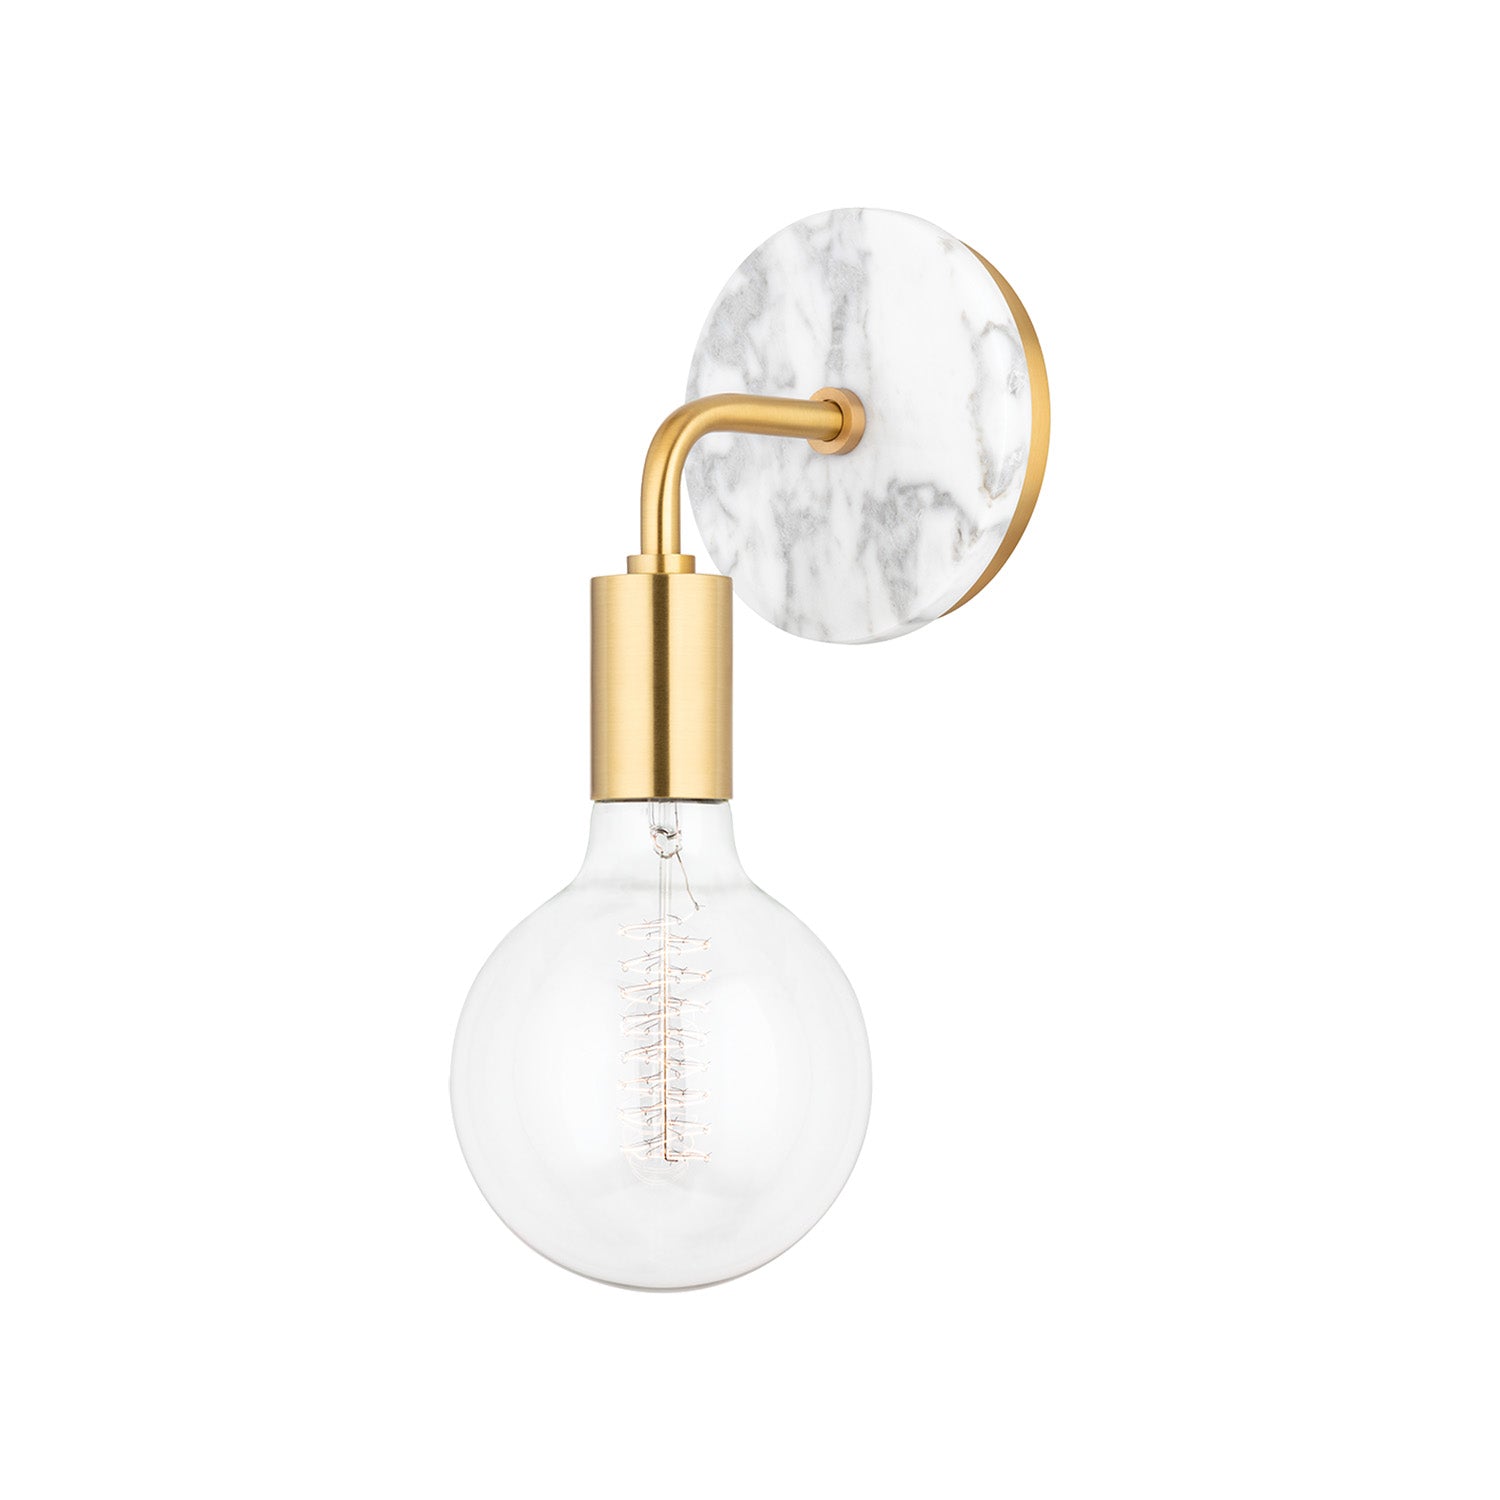 CHLOE - Chic White Marble and Brass Wall Light